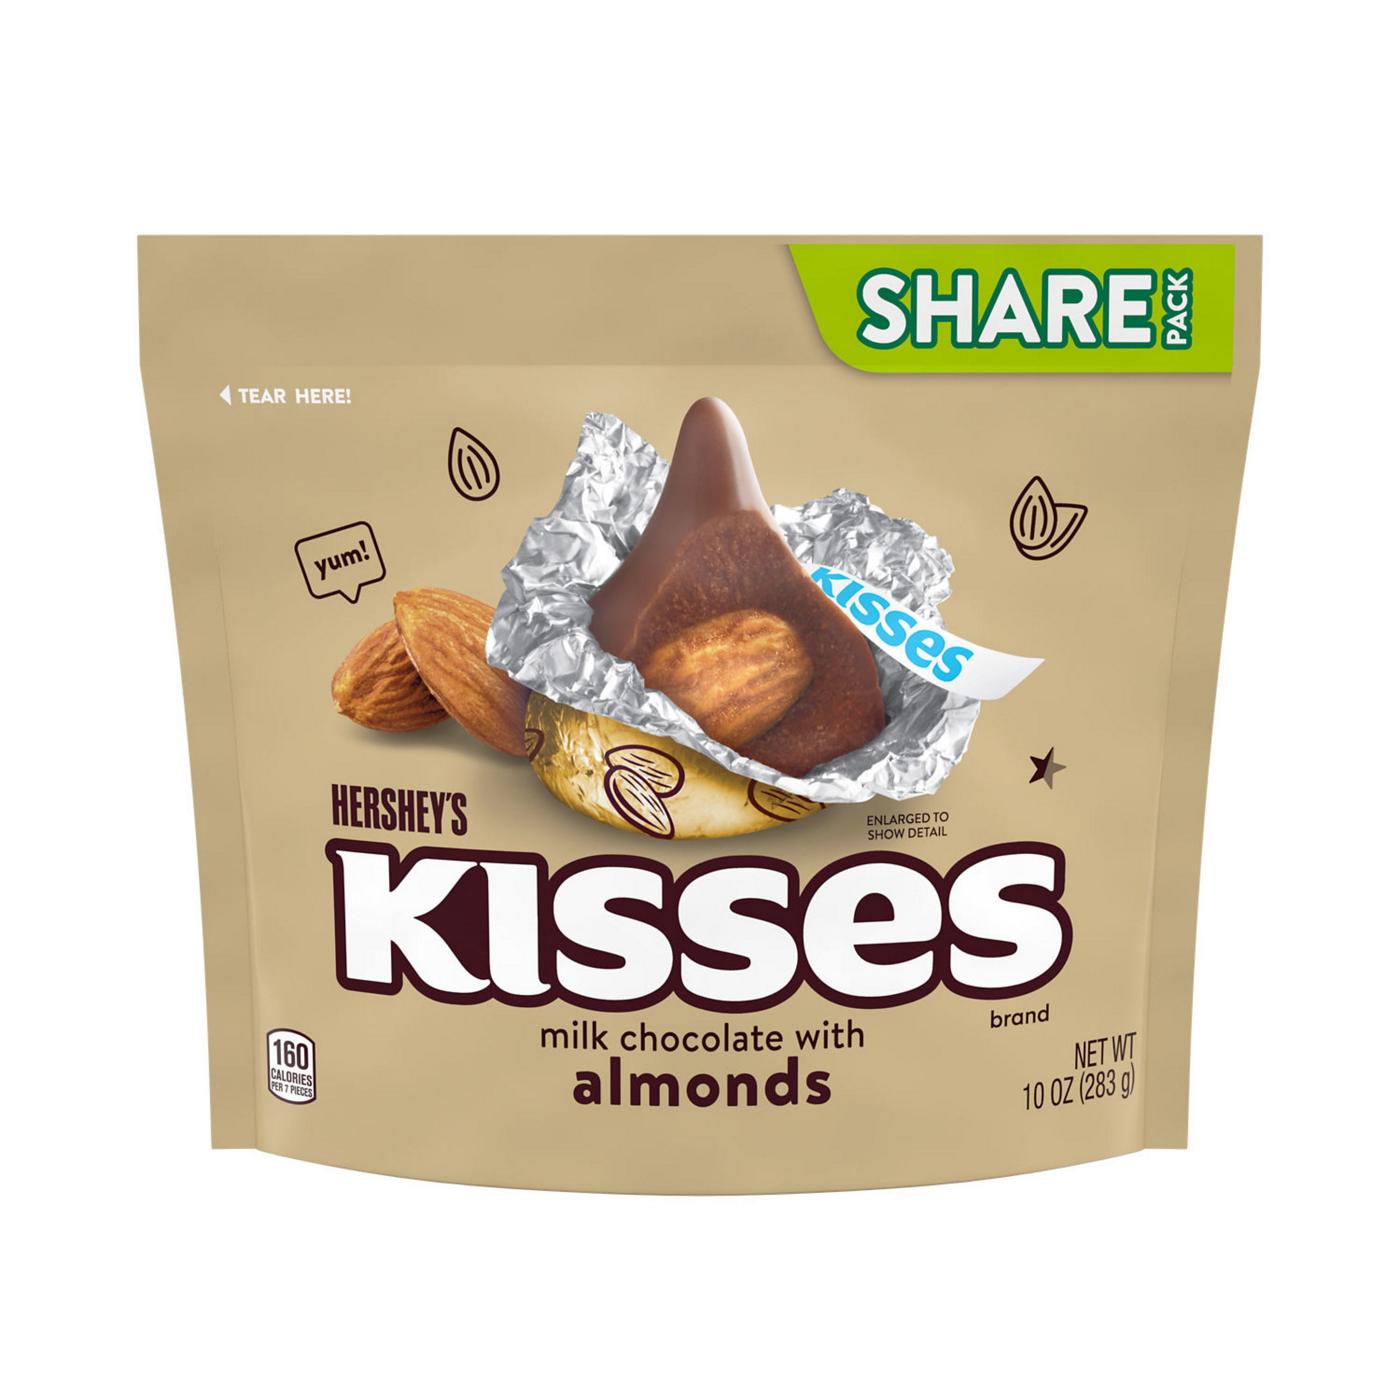 Hershey's Kisses Milk Chocolate with Almonds Candy - Share Pack; image 1 of 7